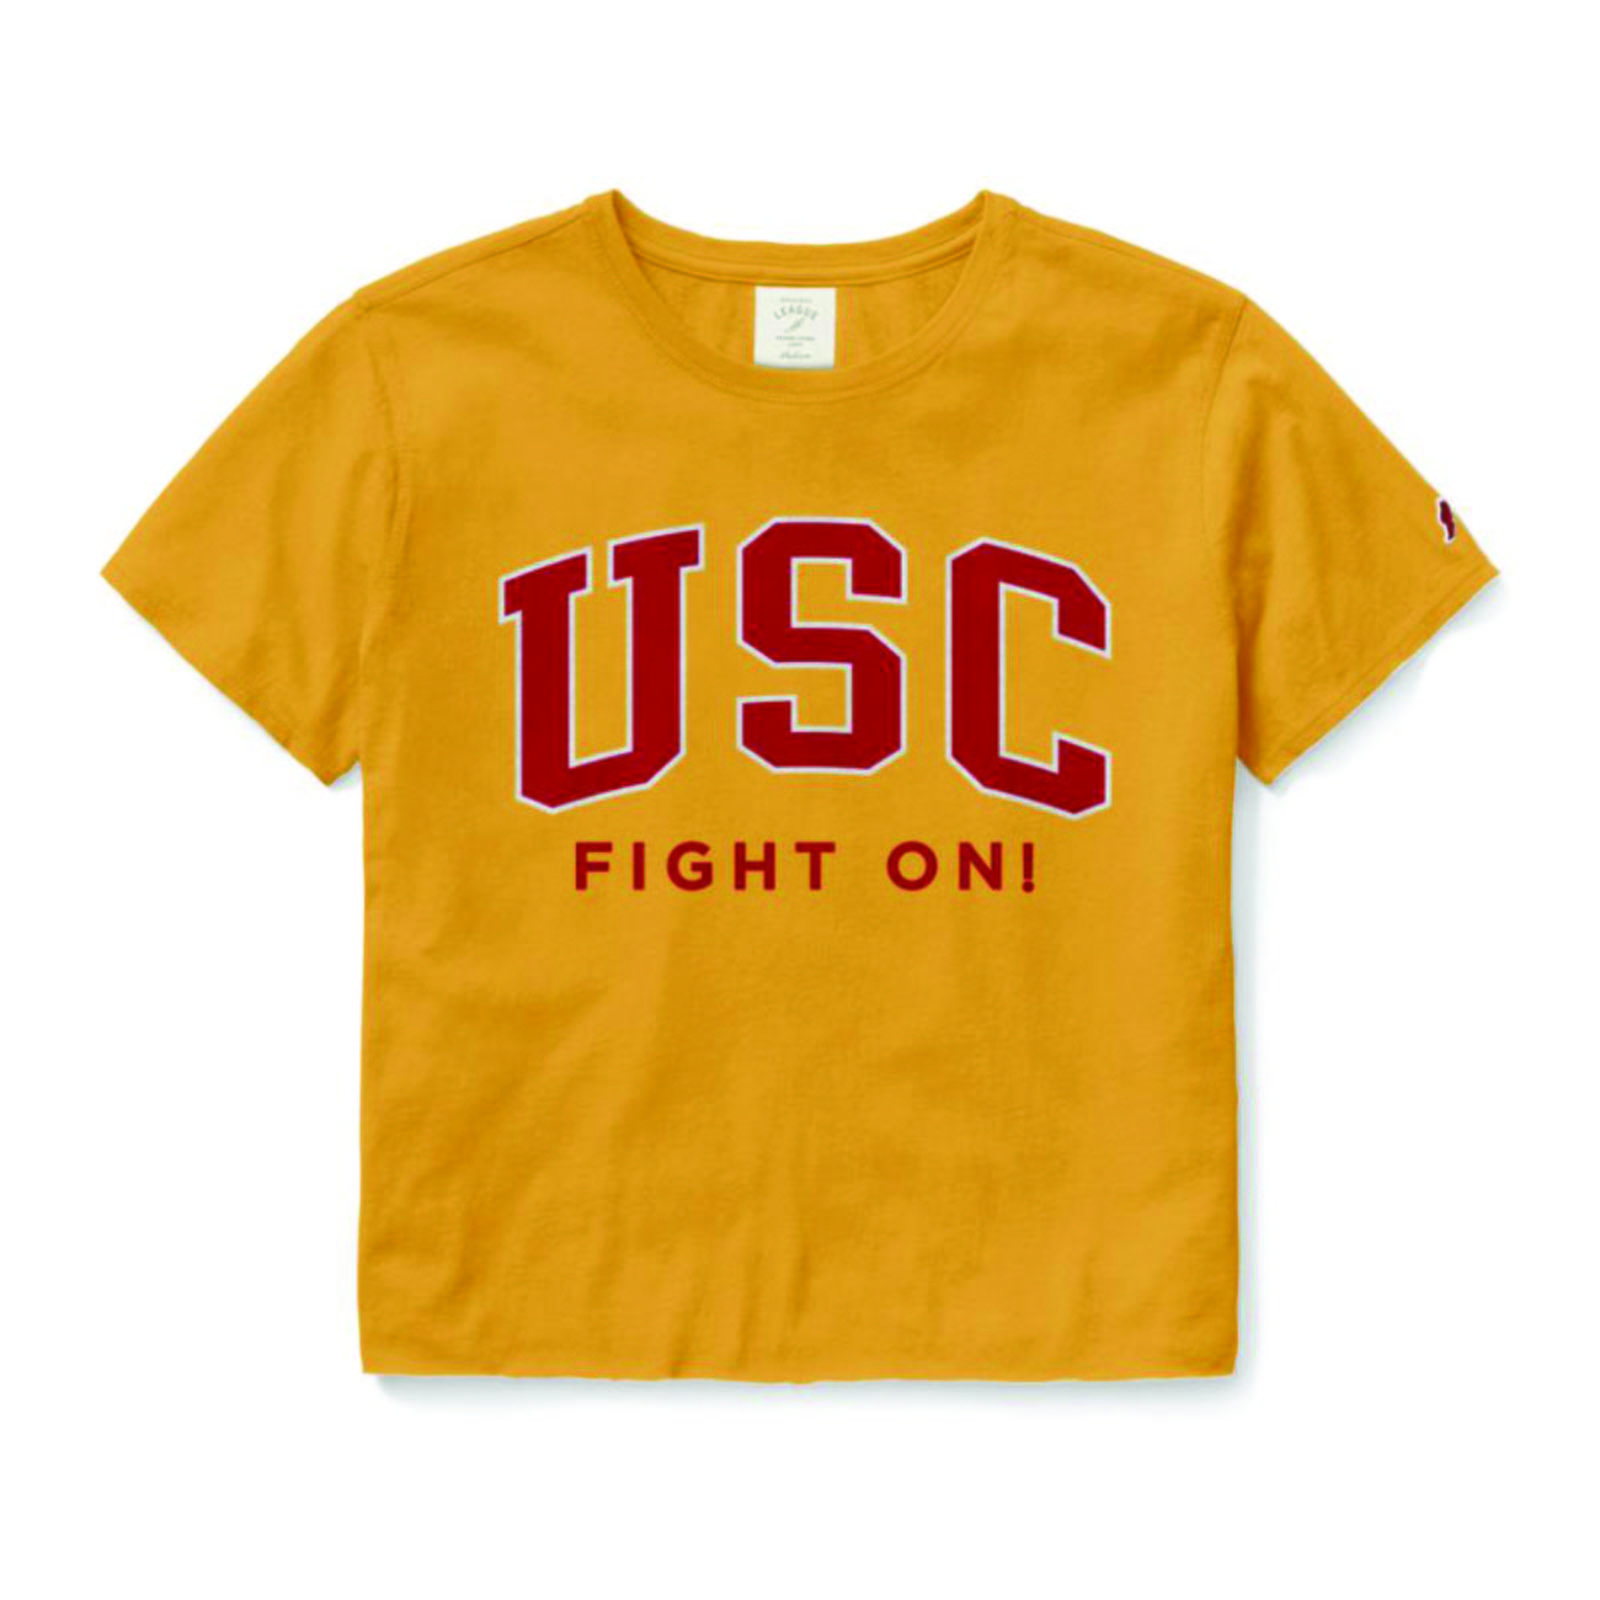 USC Fight On! Womens Clothesline Crop SS Tee image01